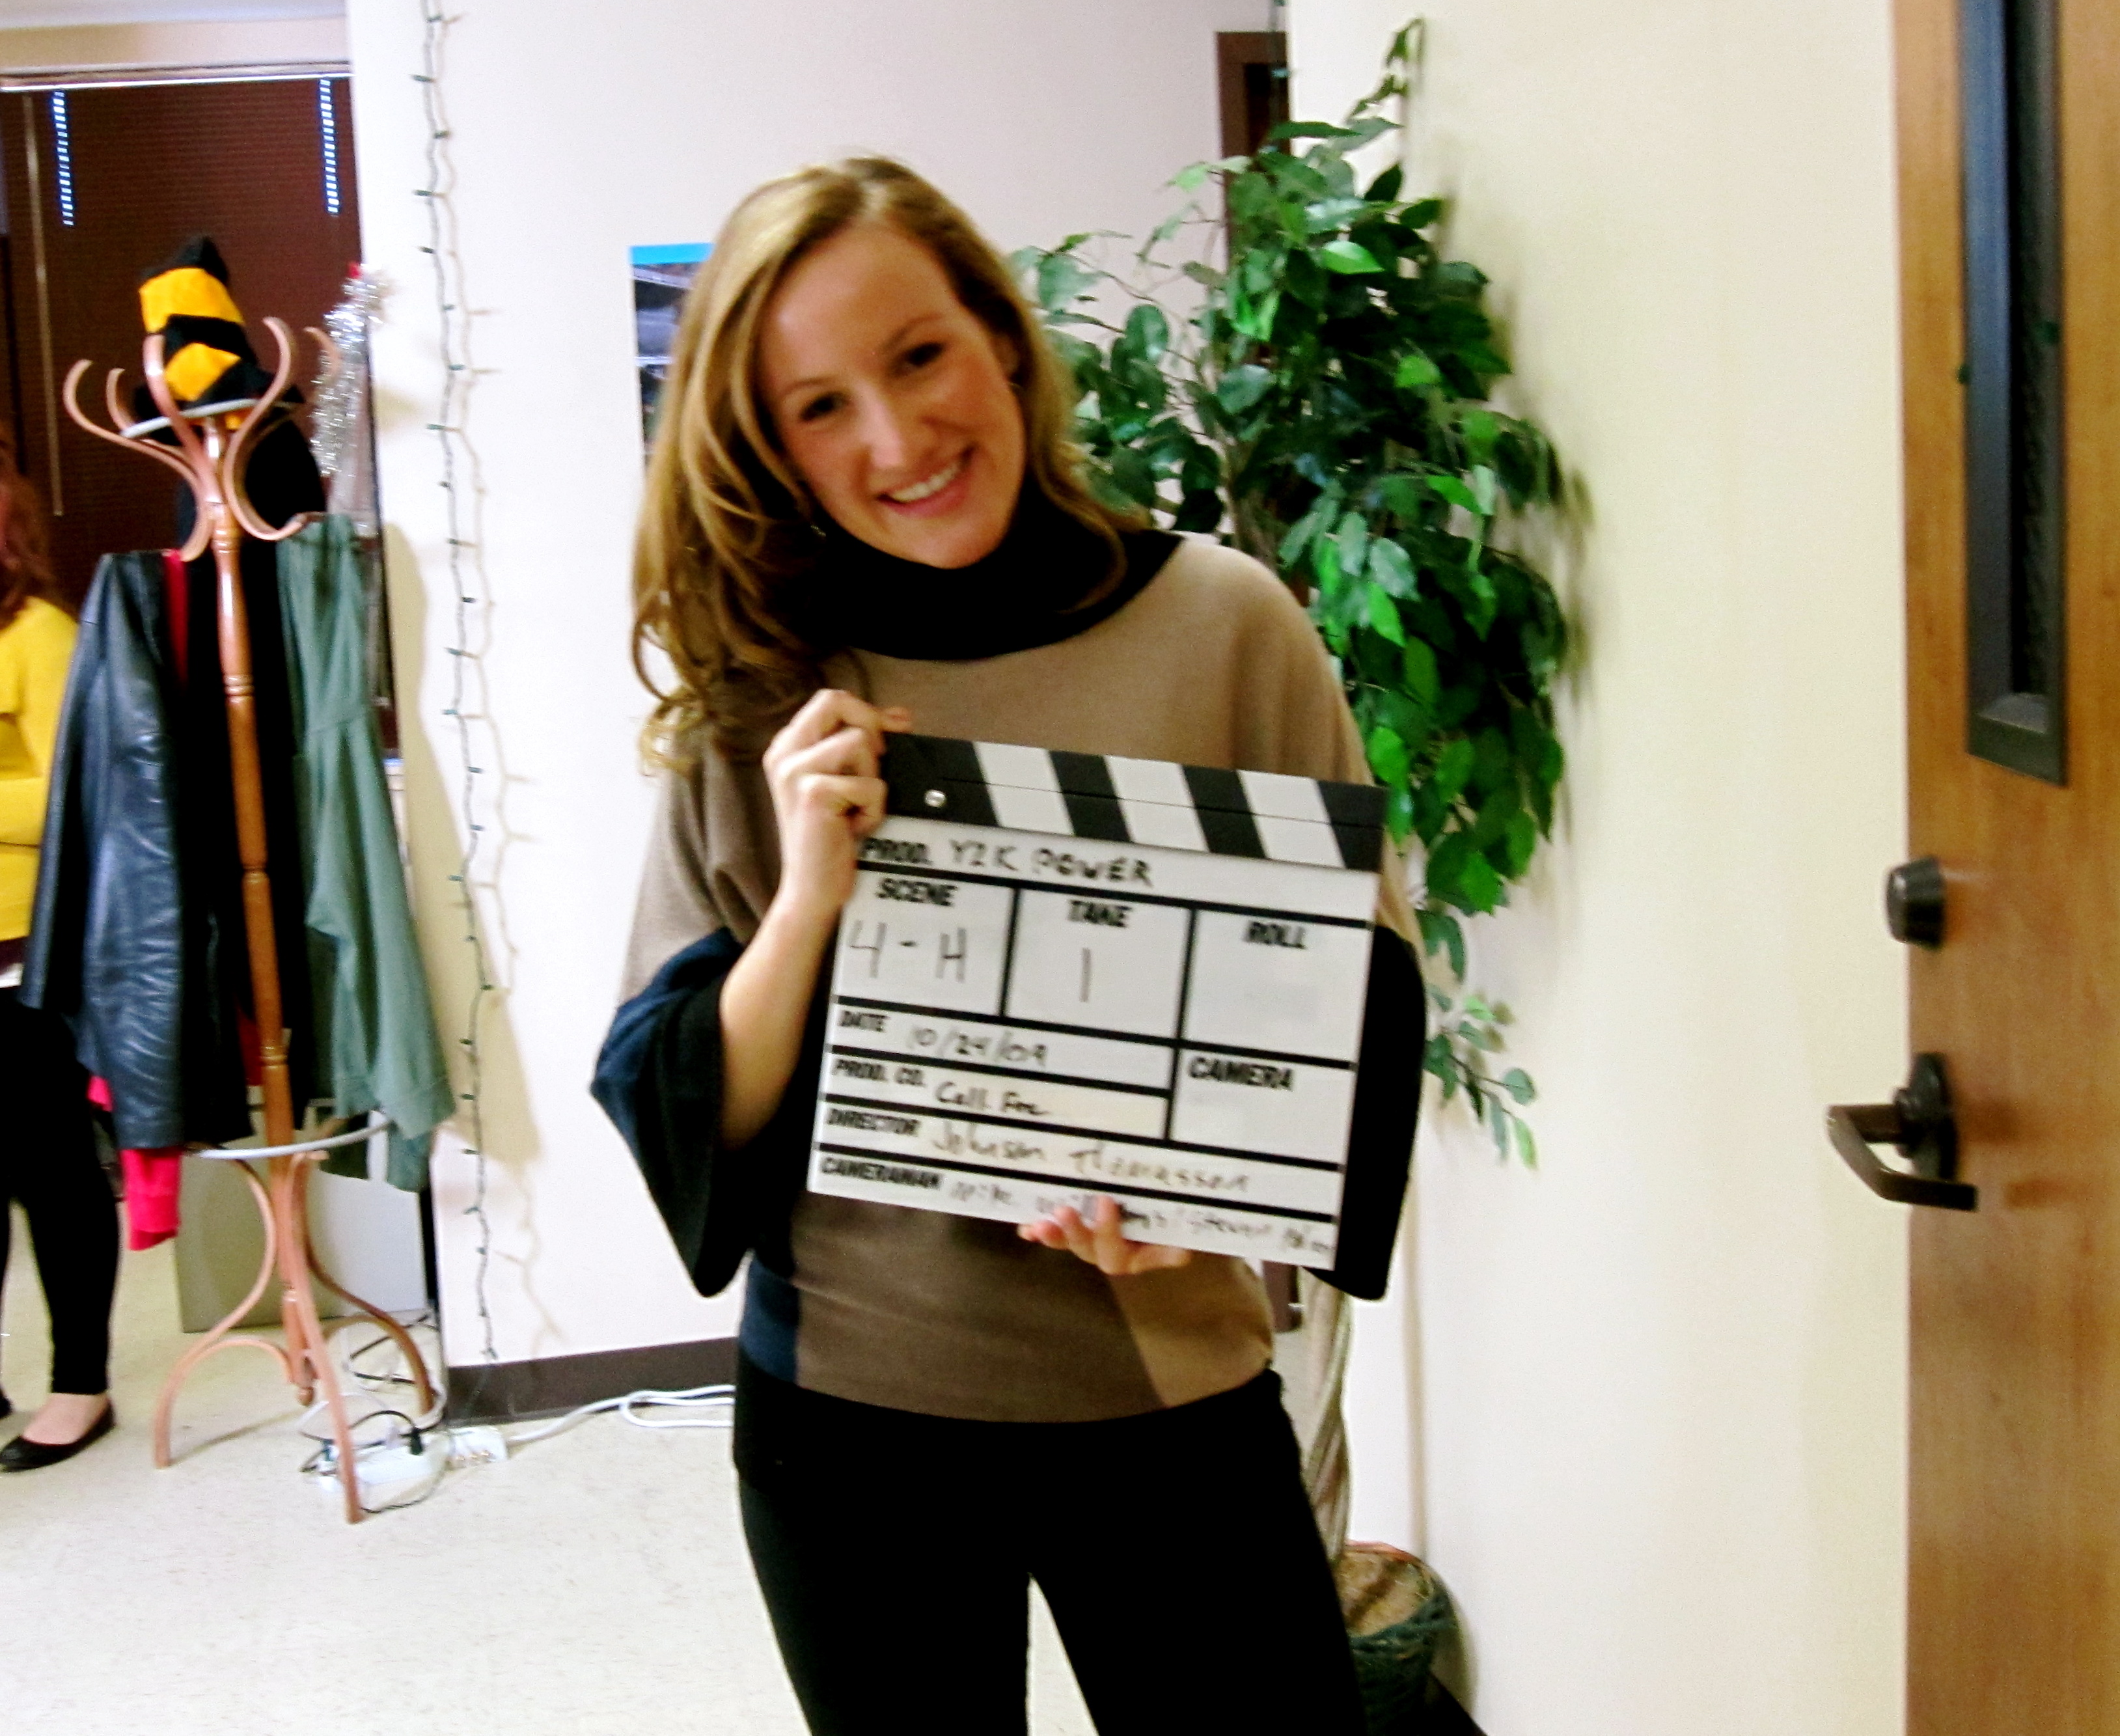 Katelyn on the set of 'M-Power' for the National Film Challenge in Fall 2009